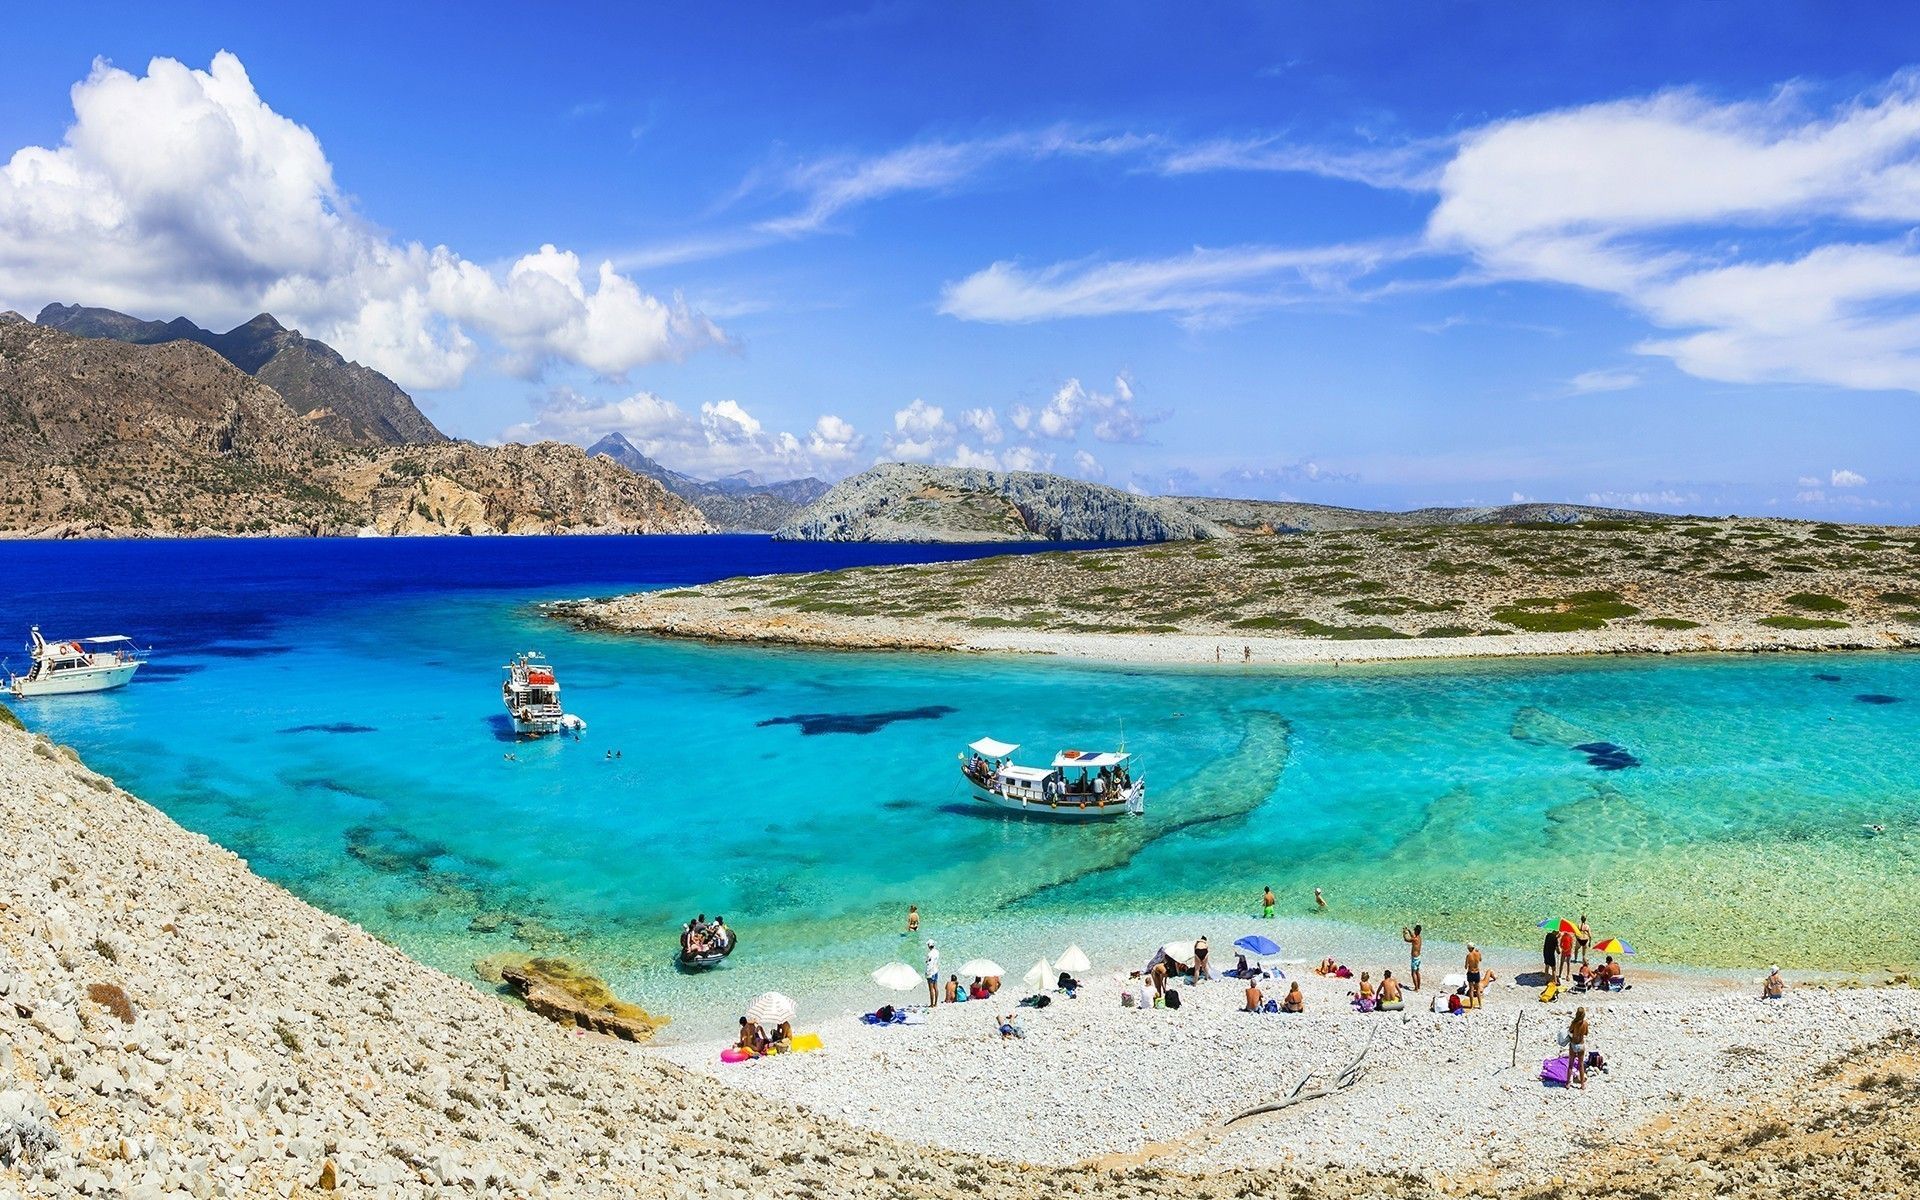 shutterstock_454145044_beautiful_turquoise_beaches_of_Greece_Astypalea_island_Dodecanes_cd7a62ea86.jpeg